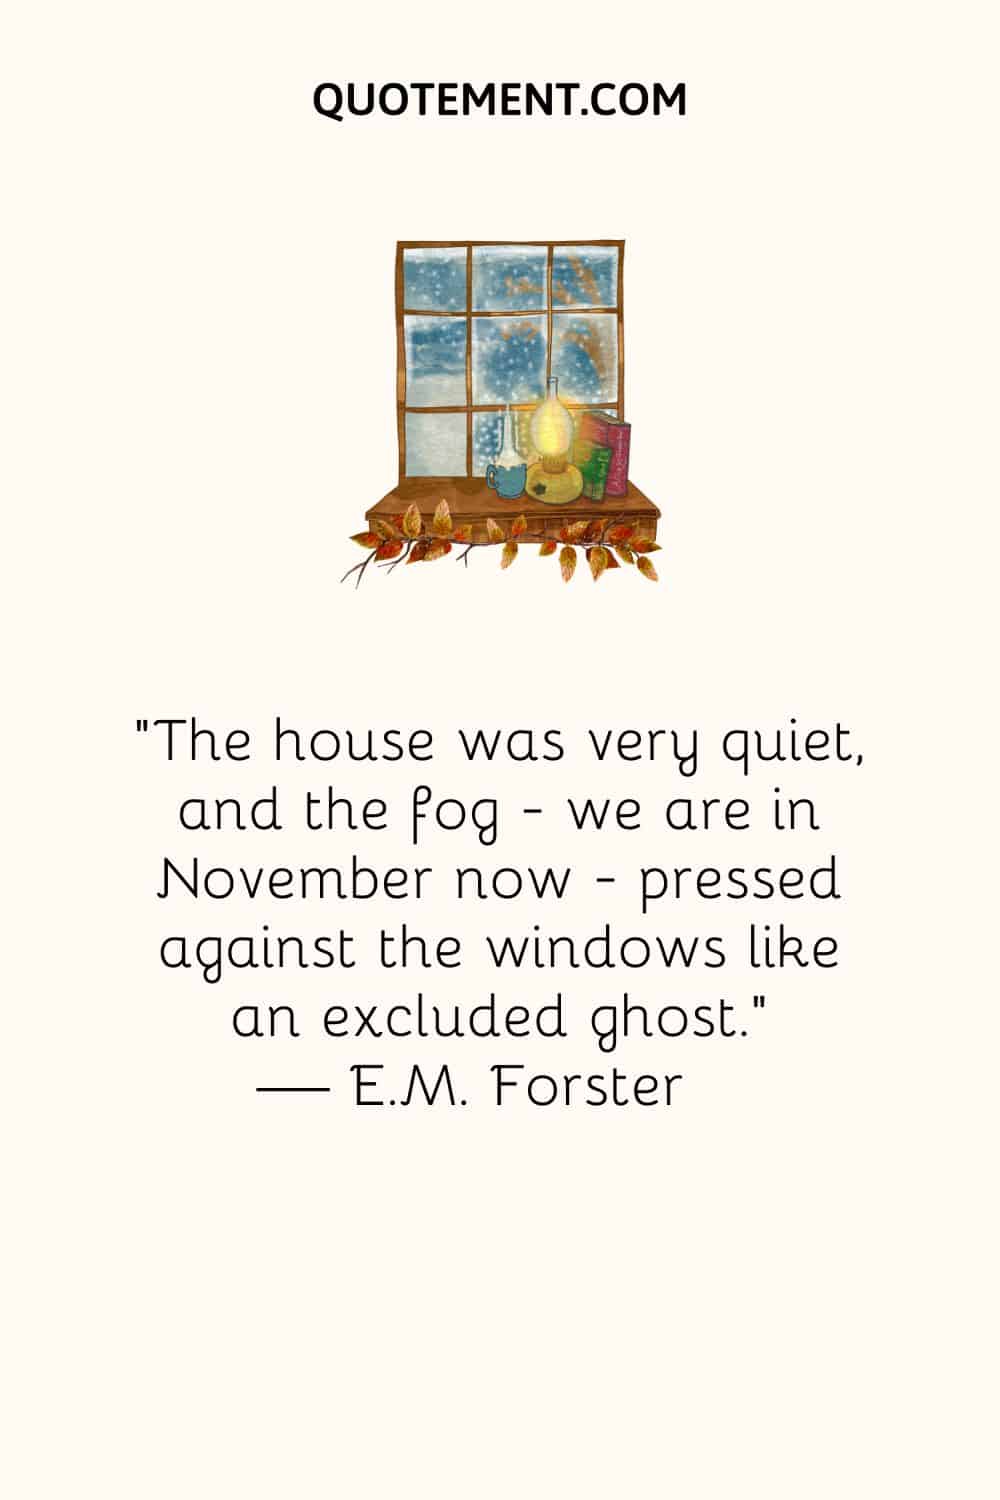 The house was very quiet, and the fog—we are in November now—pressed against the windows like an excluded ghost